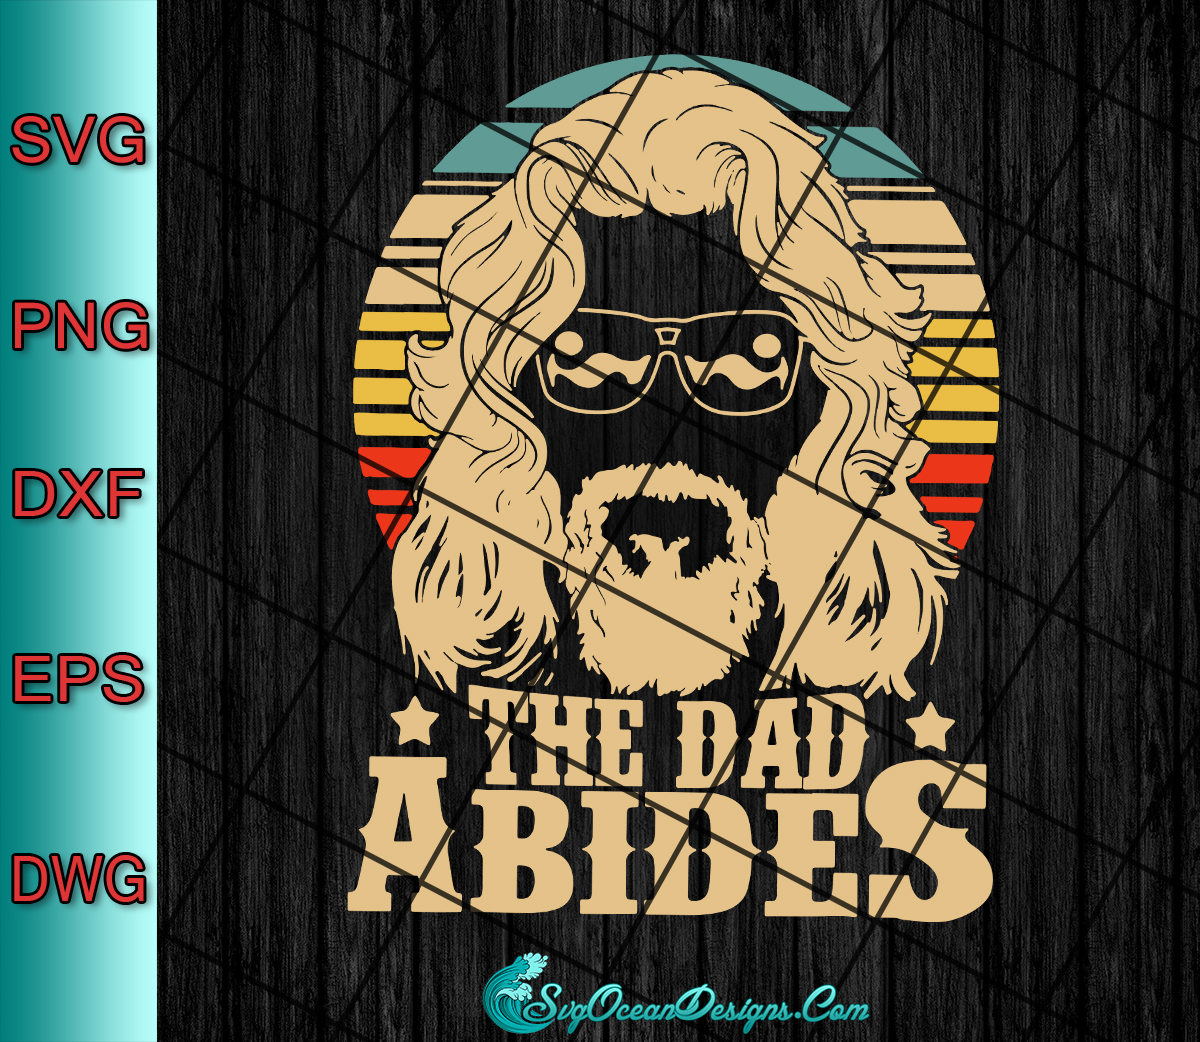 Download The Dad Abides Svg Png Eps Dxf, Cut File, Father's Day Svg ...